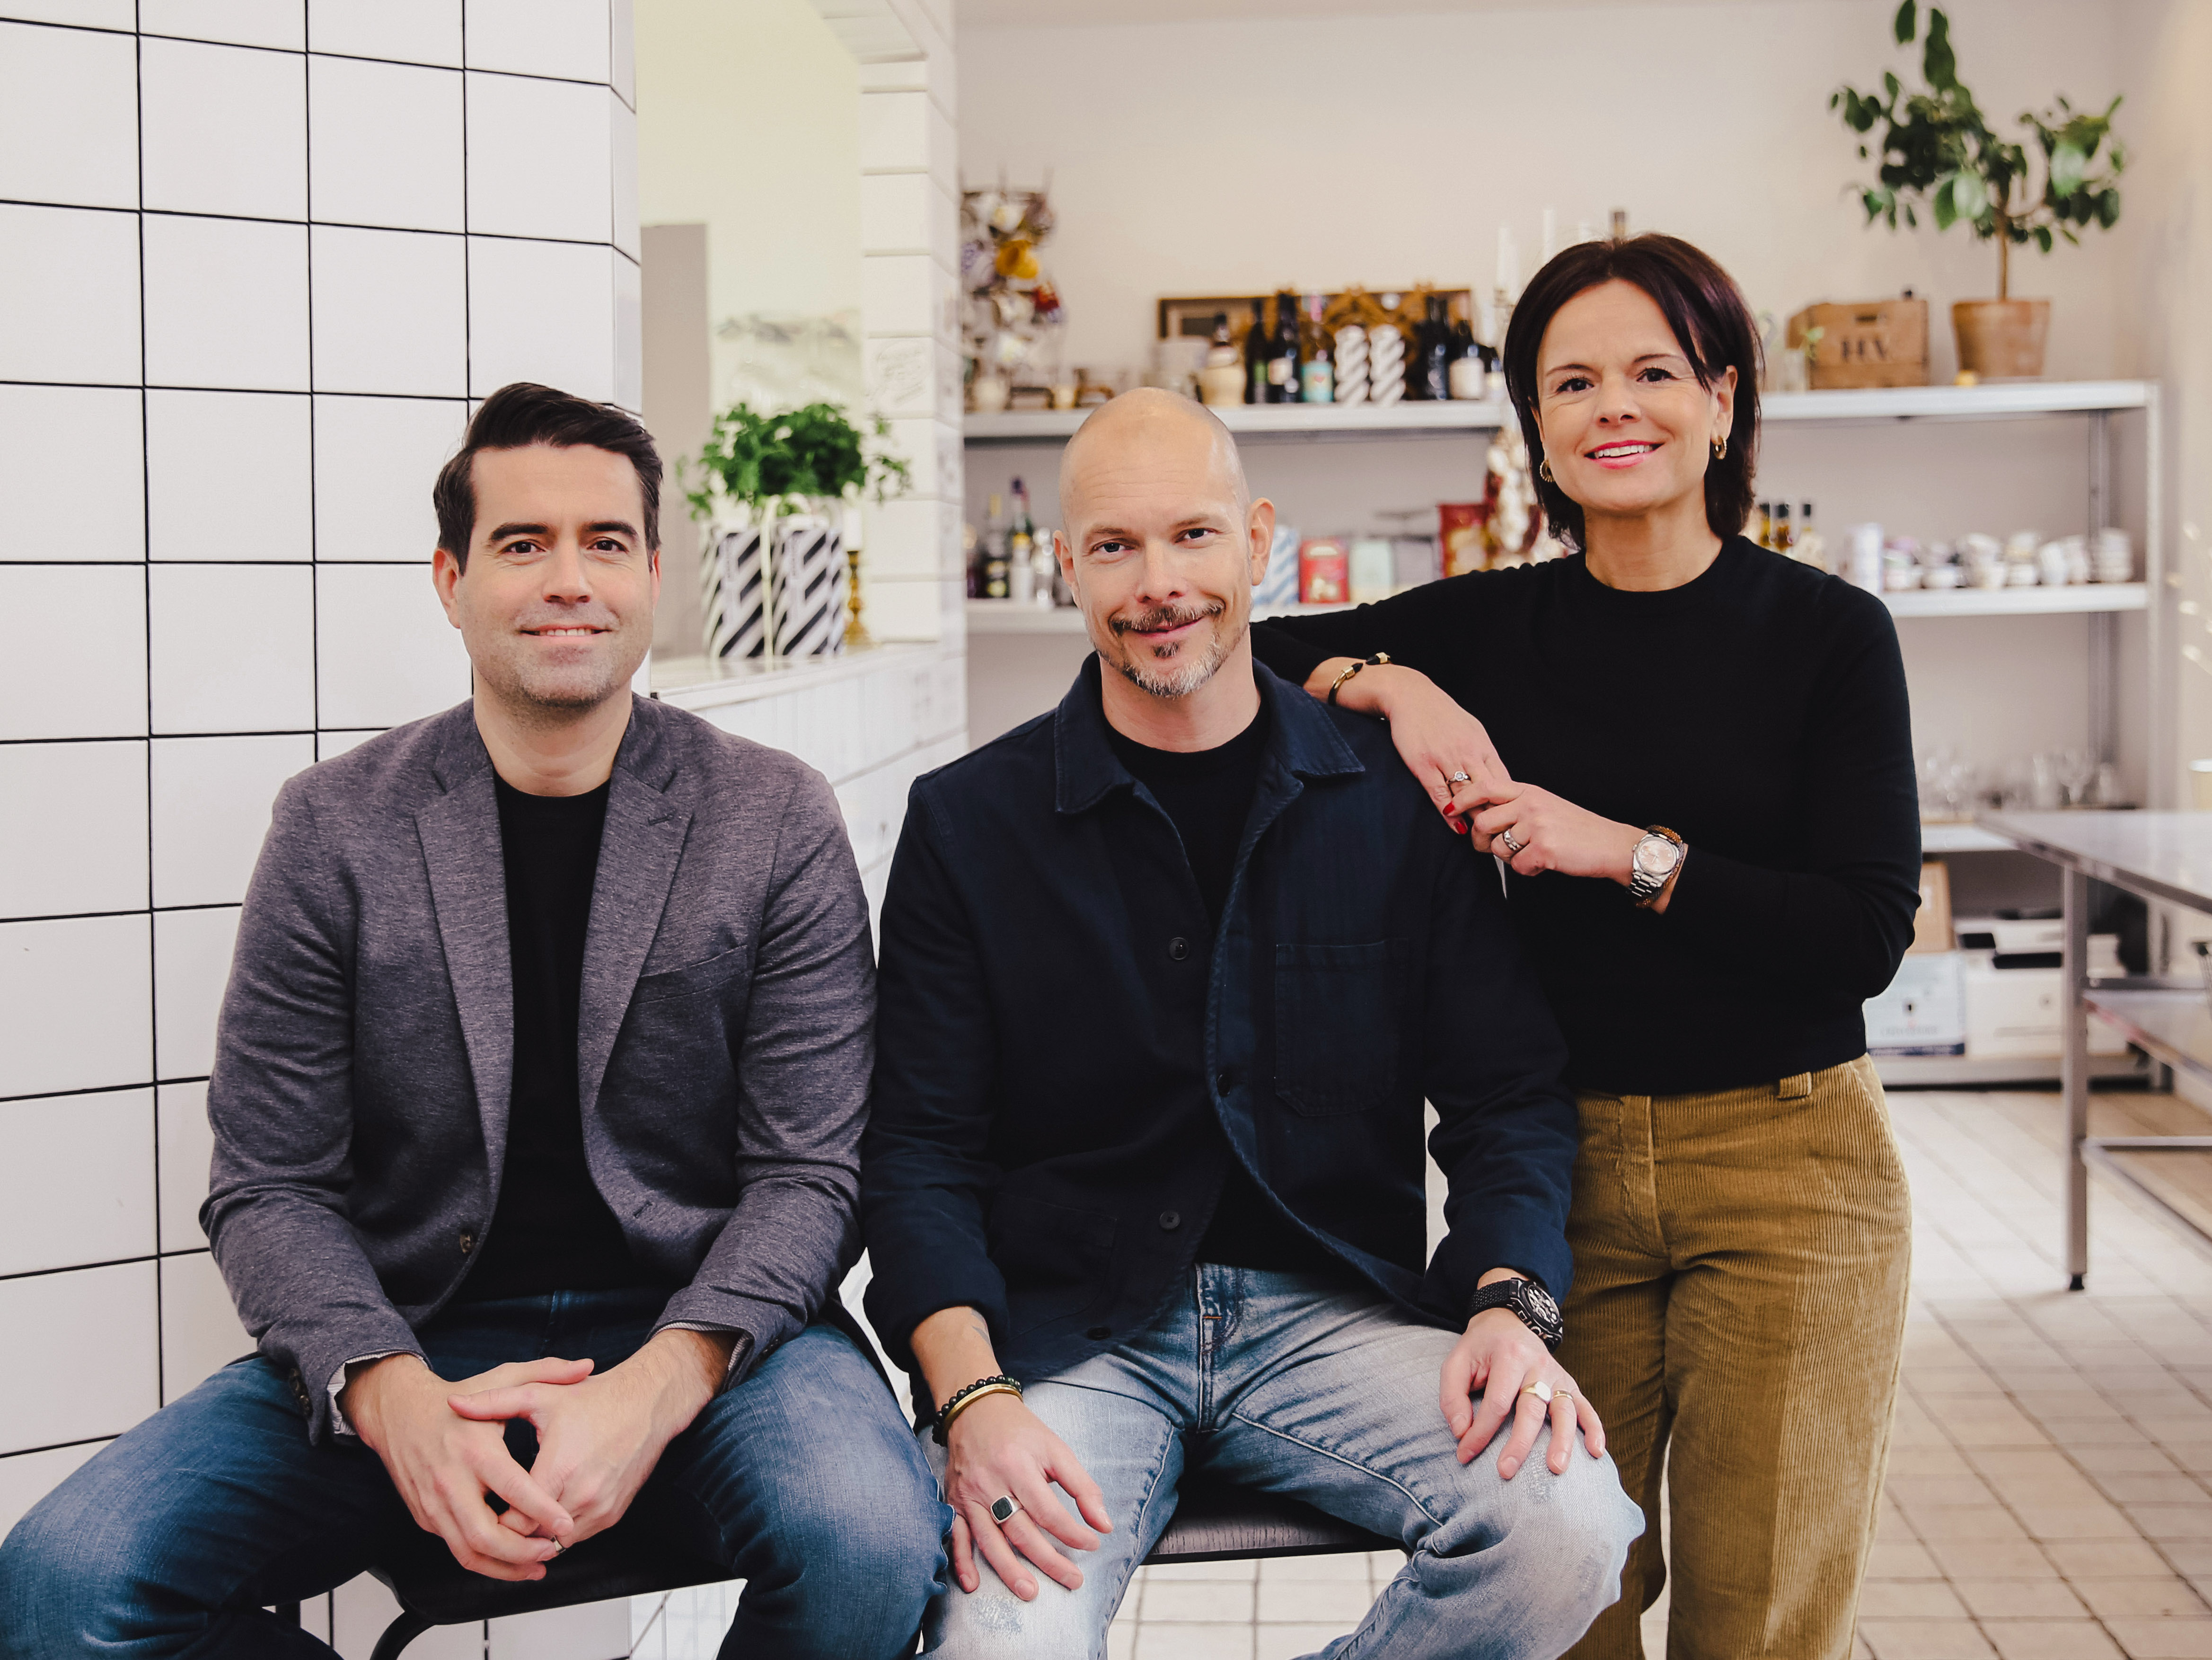 Swedish startup Sproud raises £4.8m from London-based VGC Partners for plant-based milk